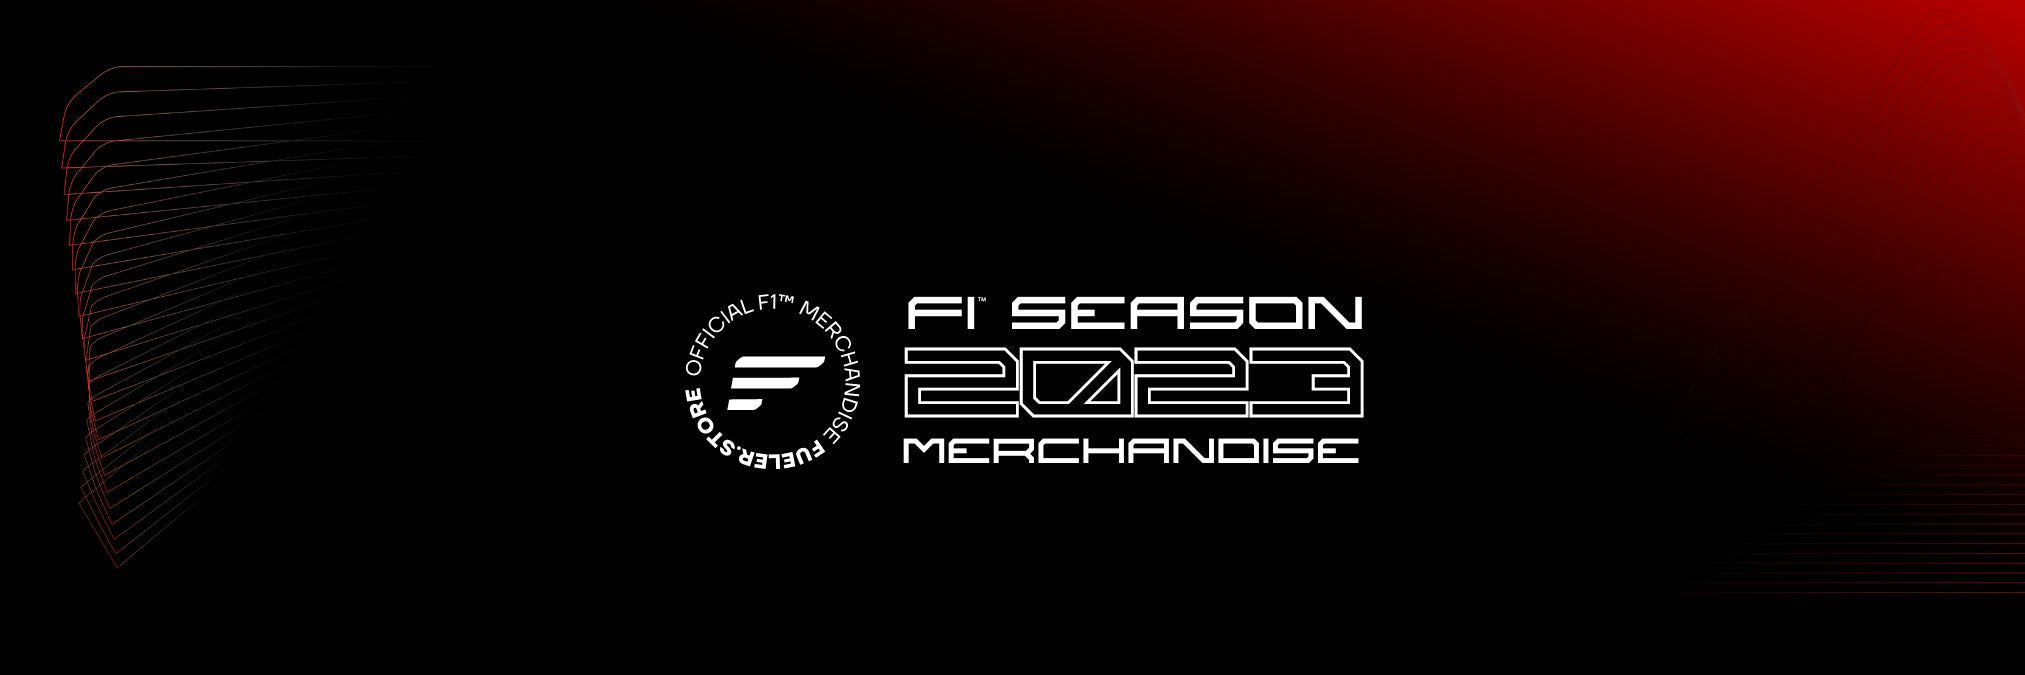 F1 2023 Collection - F1 and Motorpsort Offficial Merchandise - Fueler store